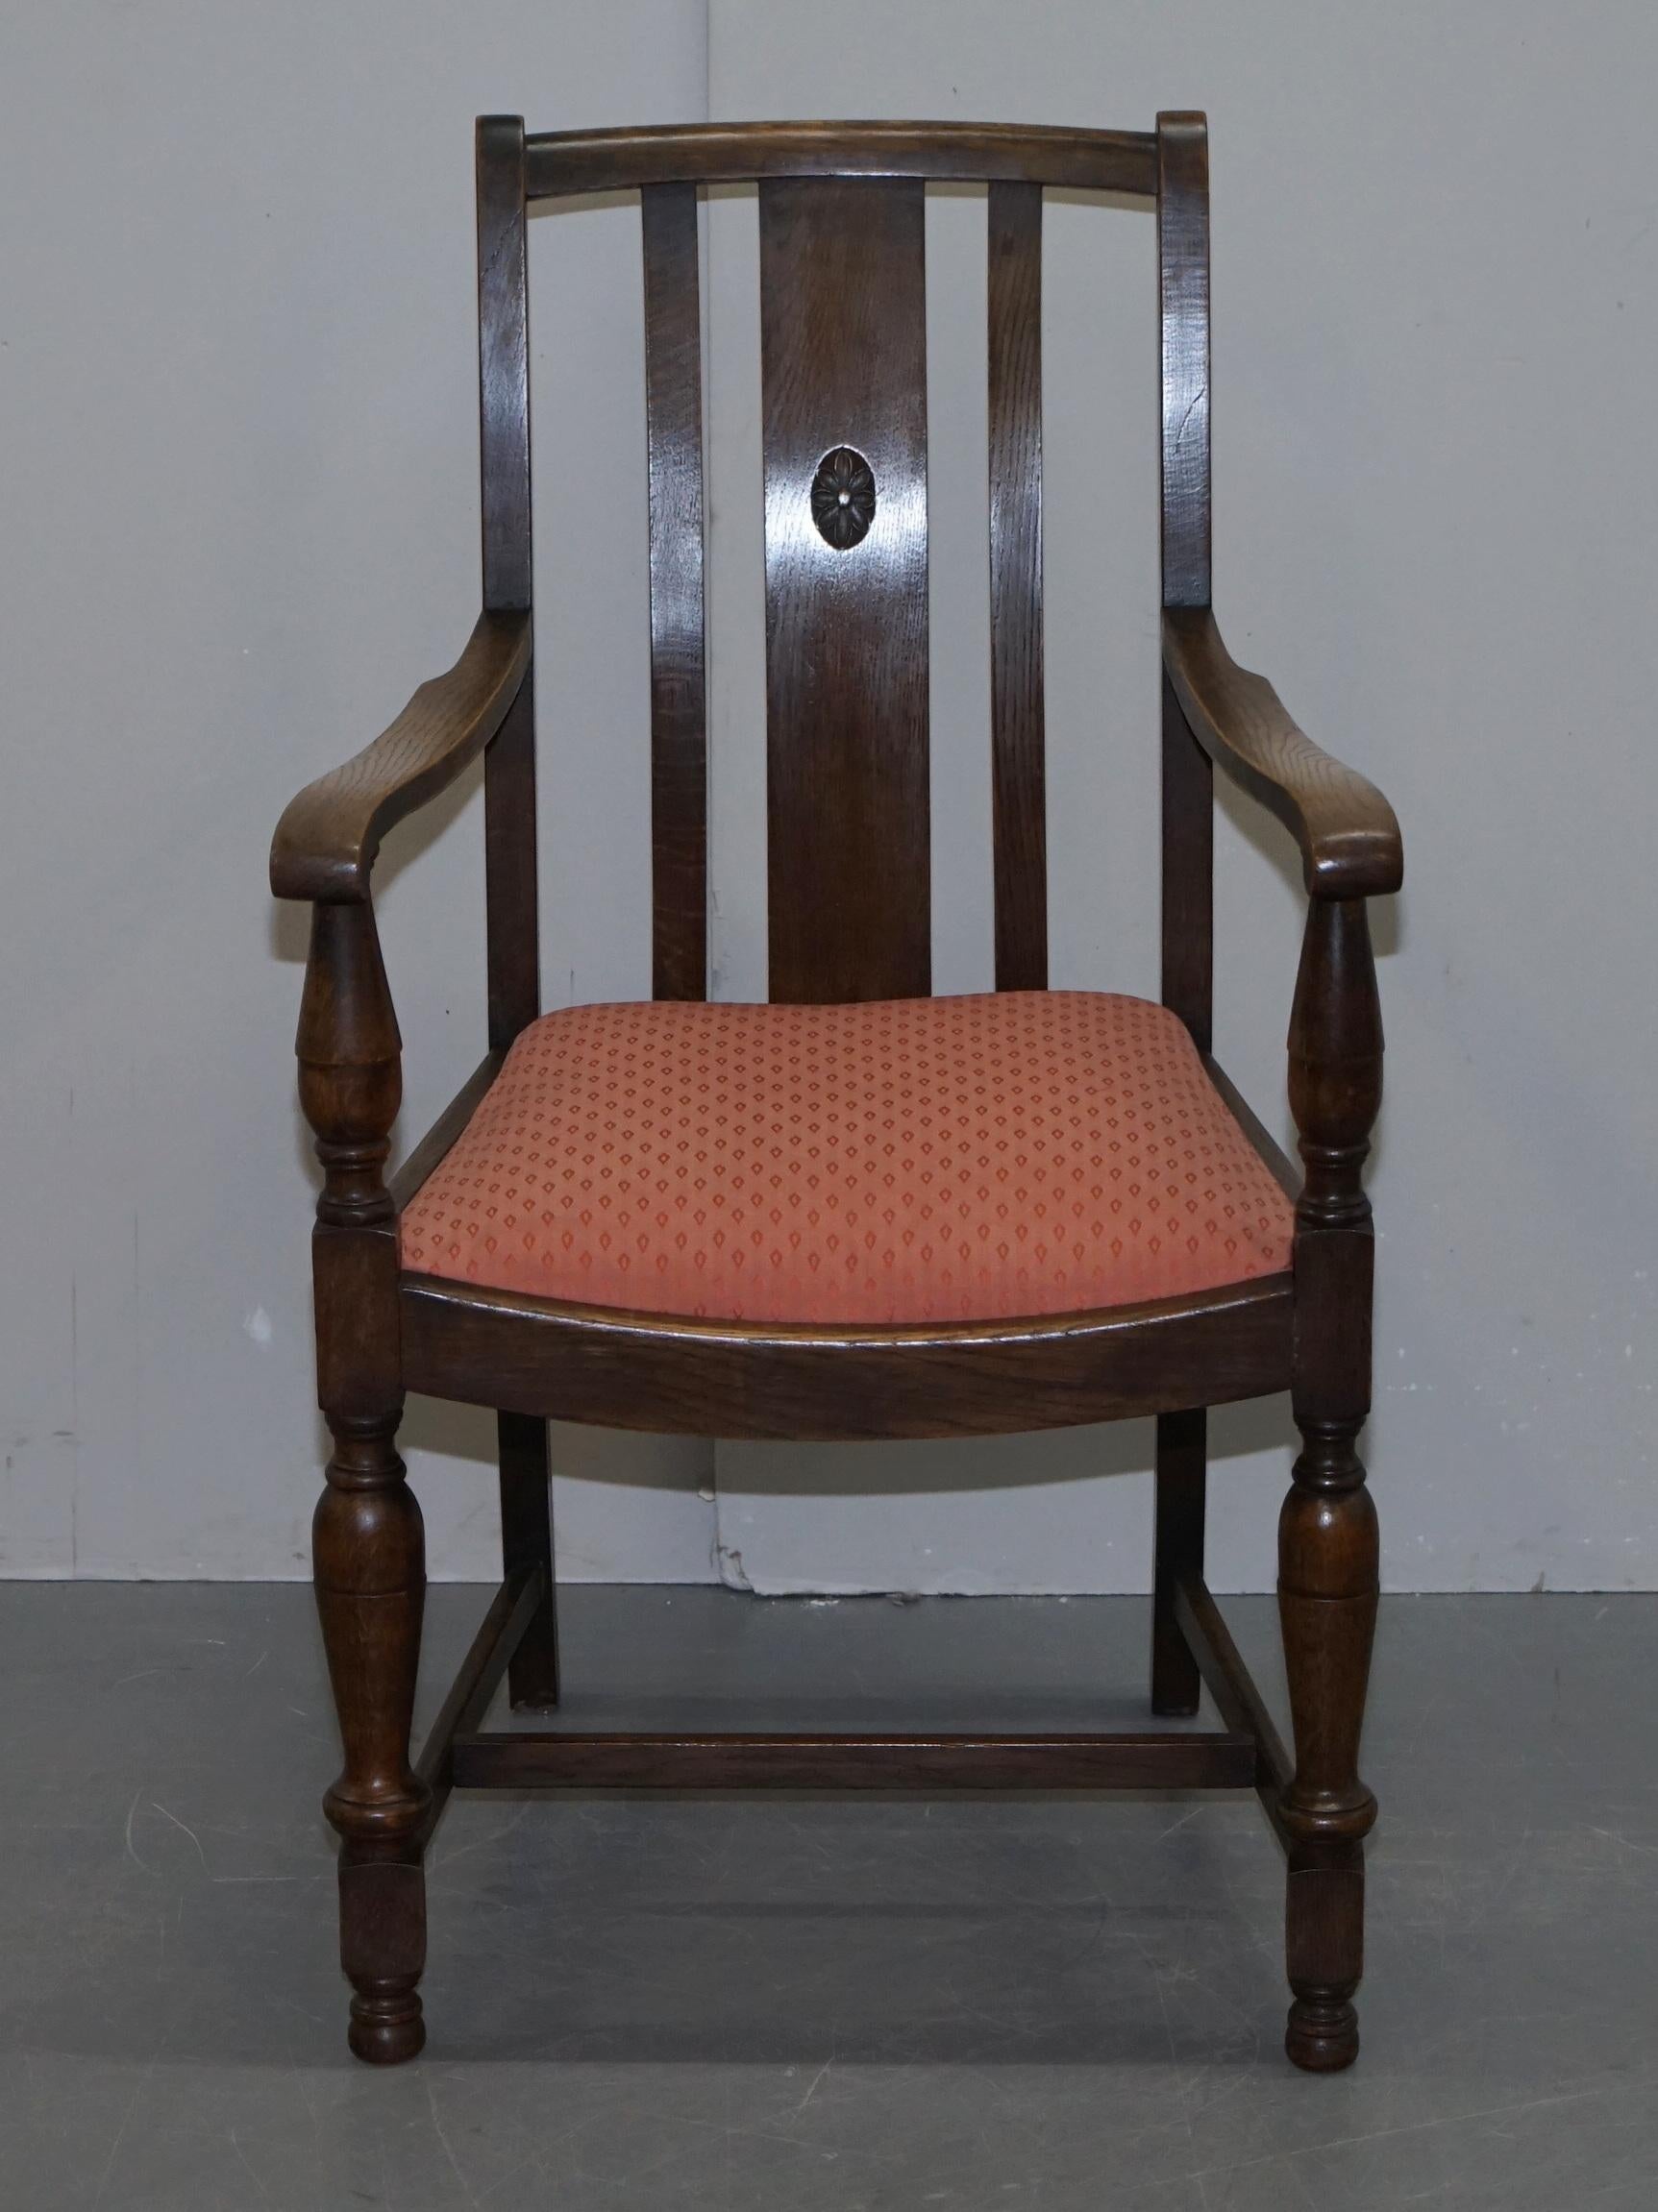 We are delighted to offer for sale this nice vintage circa 1940s occasional carver armchair

A nice piece that sits well in any setting. The arms are beautifully aged revealing the patina of the timber

In terms of the condition, we have cleaned